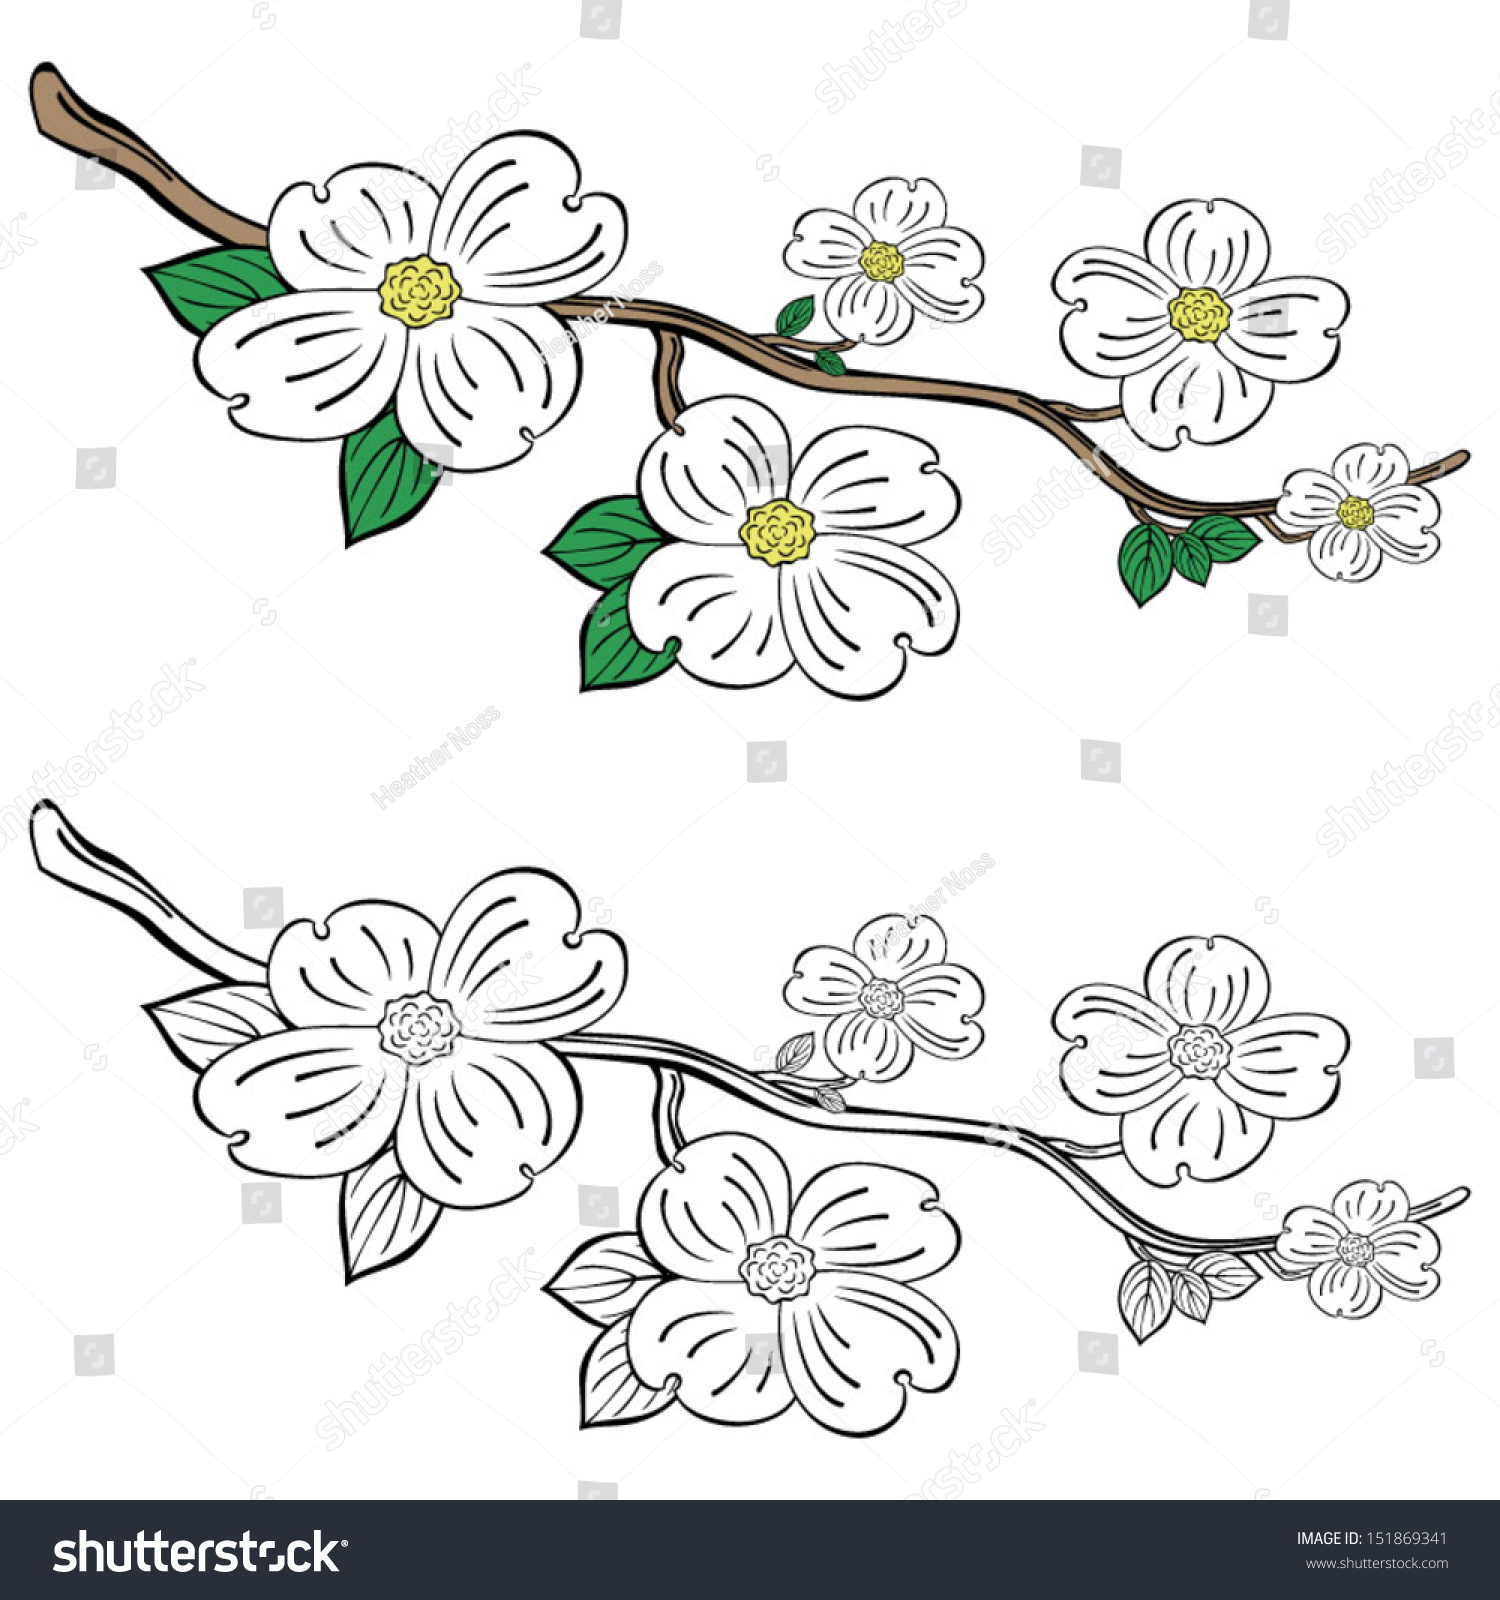 SVG of Dogwood flowers and branch svg